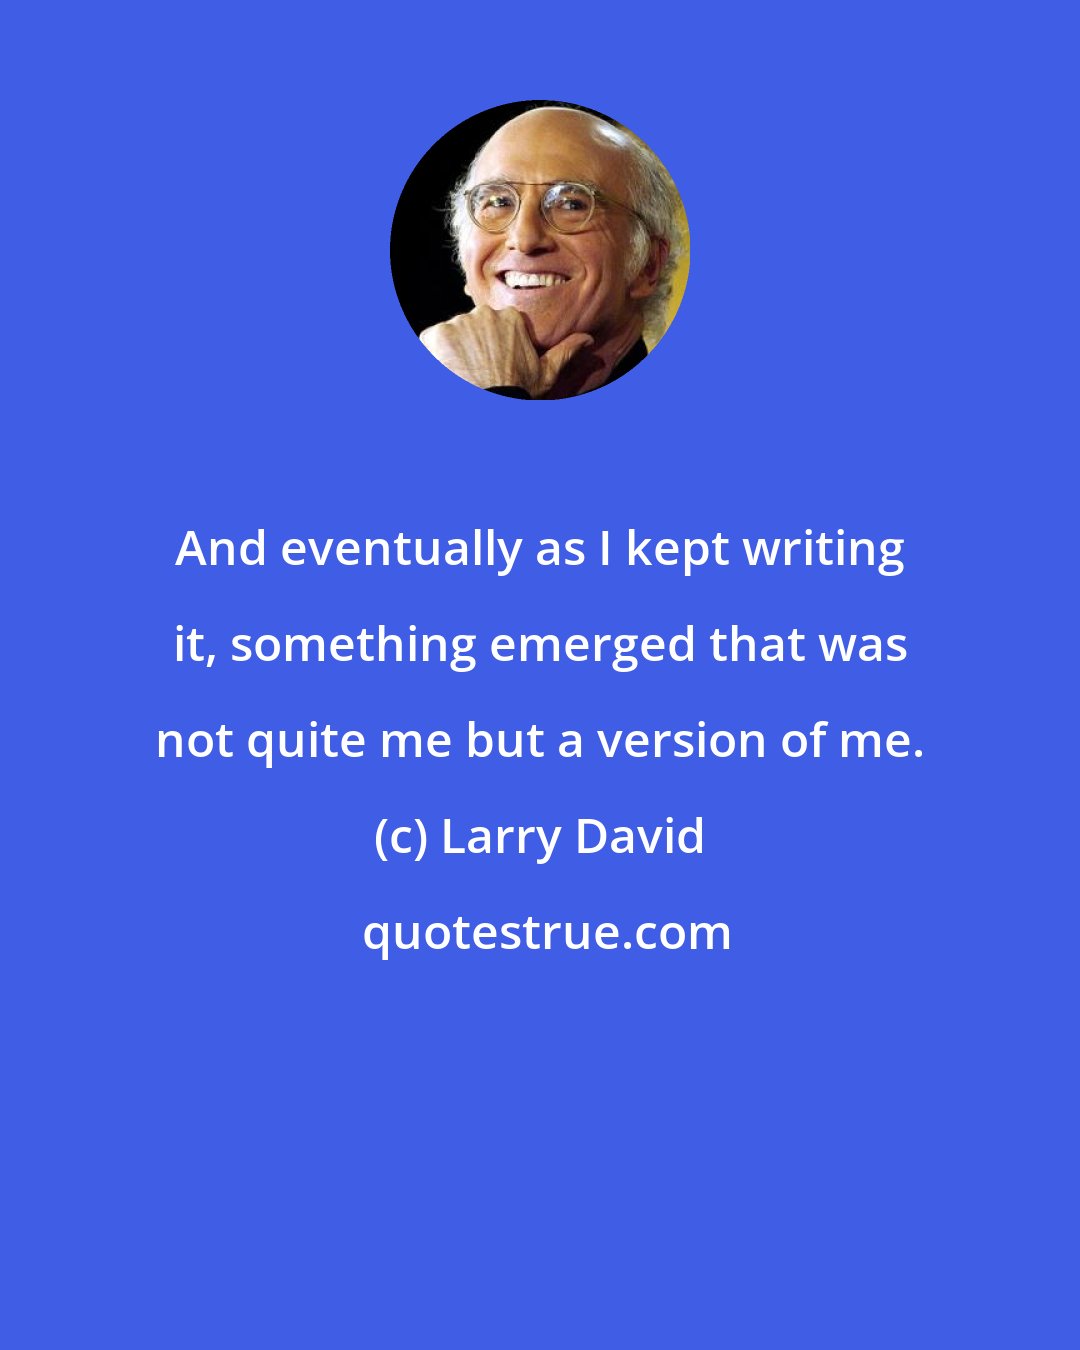 Larry David: And eventually as I kept writing it, something emerged that was not quite me but a version of me.